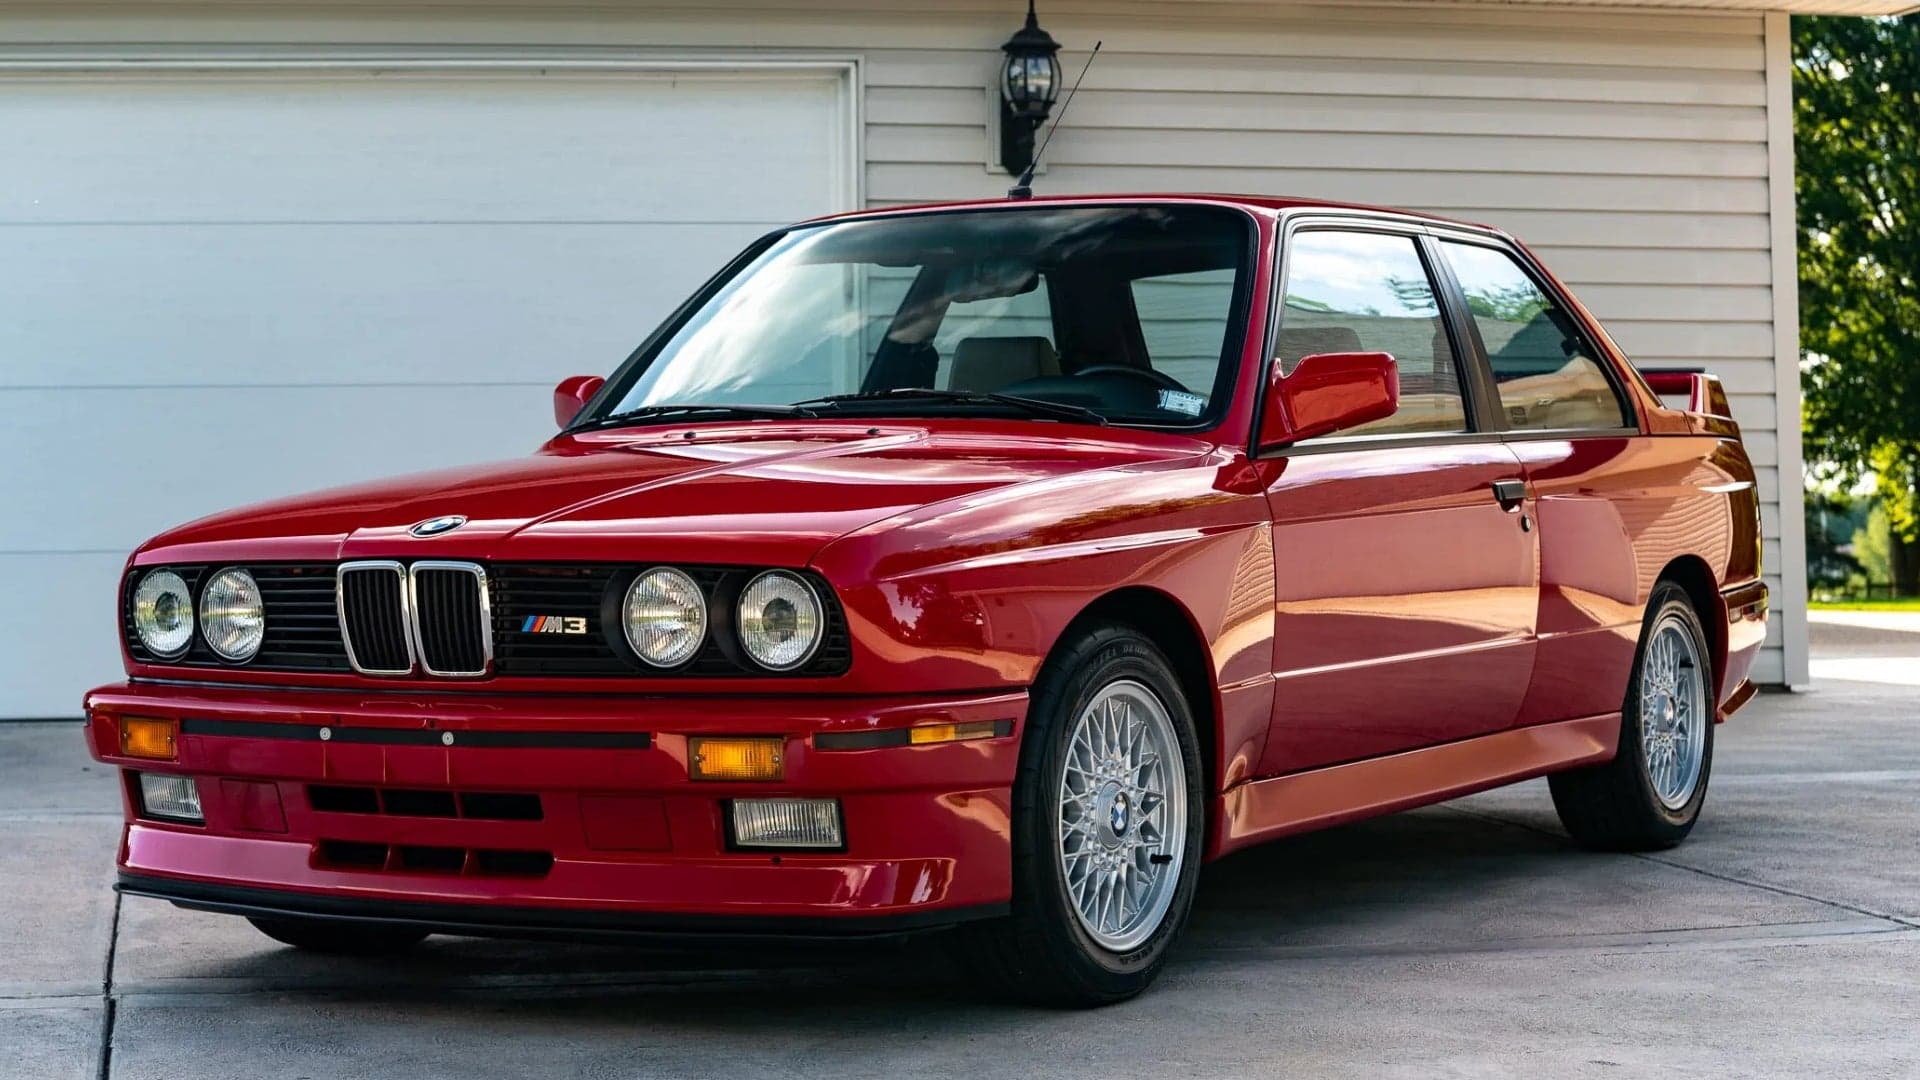 This E30 BMW M3 Just Sold for $250,000 On Bring A Trailer; Your Brain Is Now On Fire